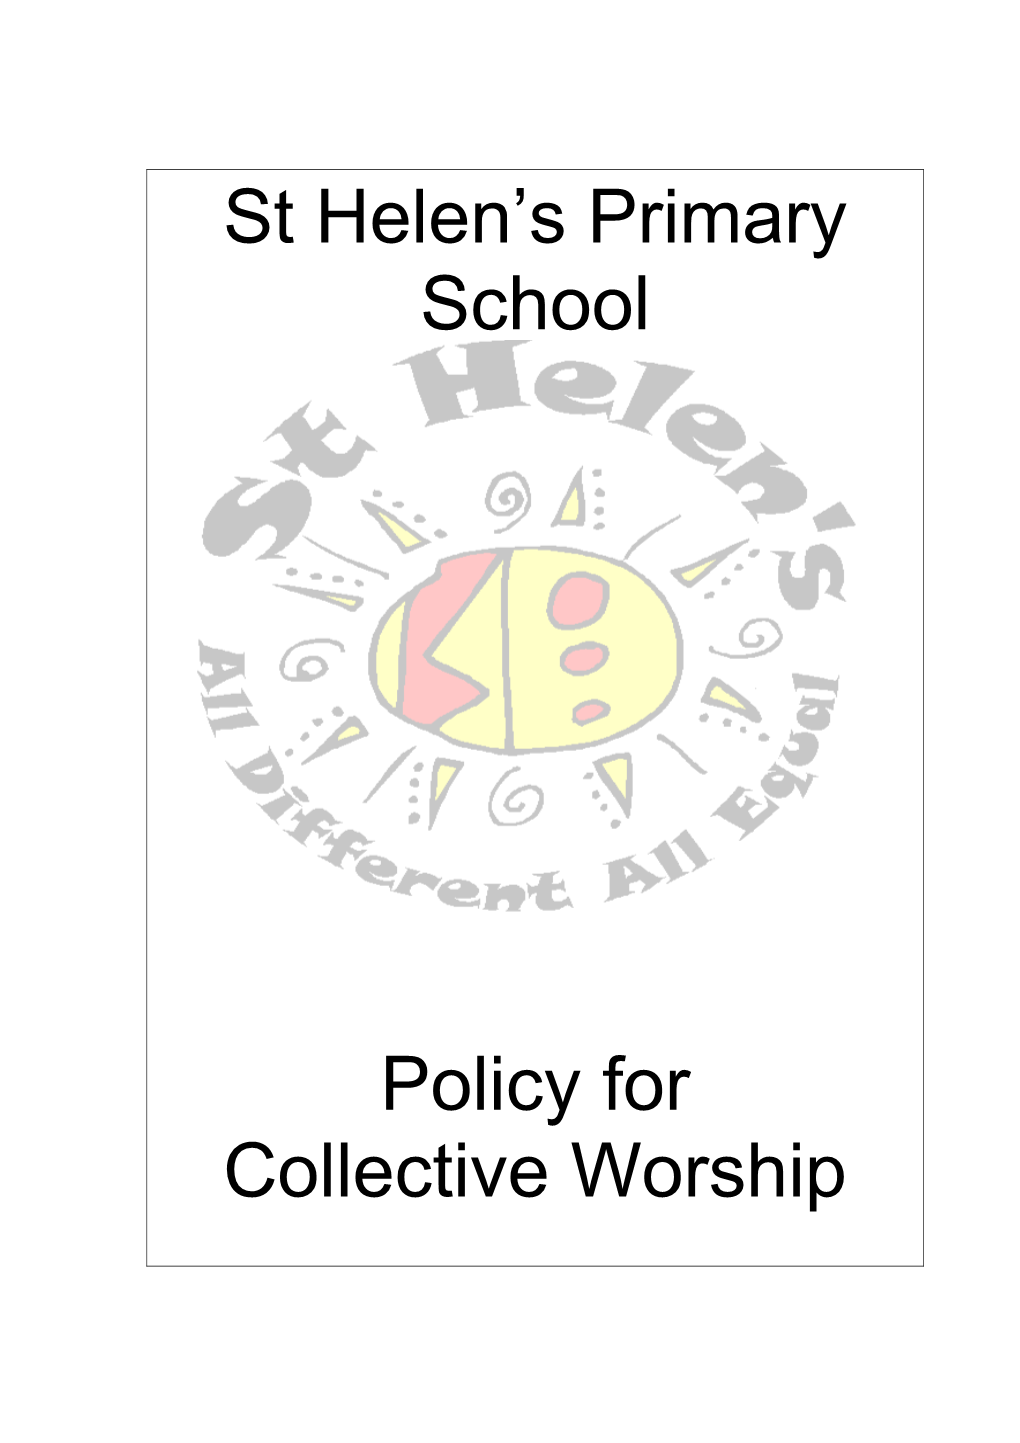 Policy for Collective Worship